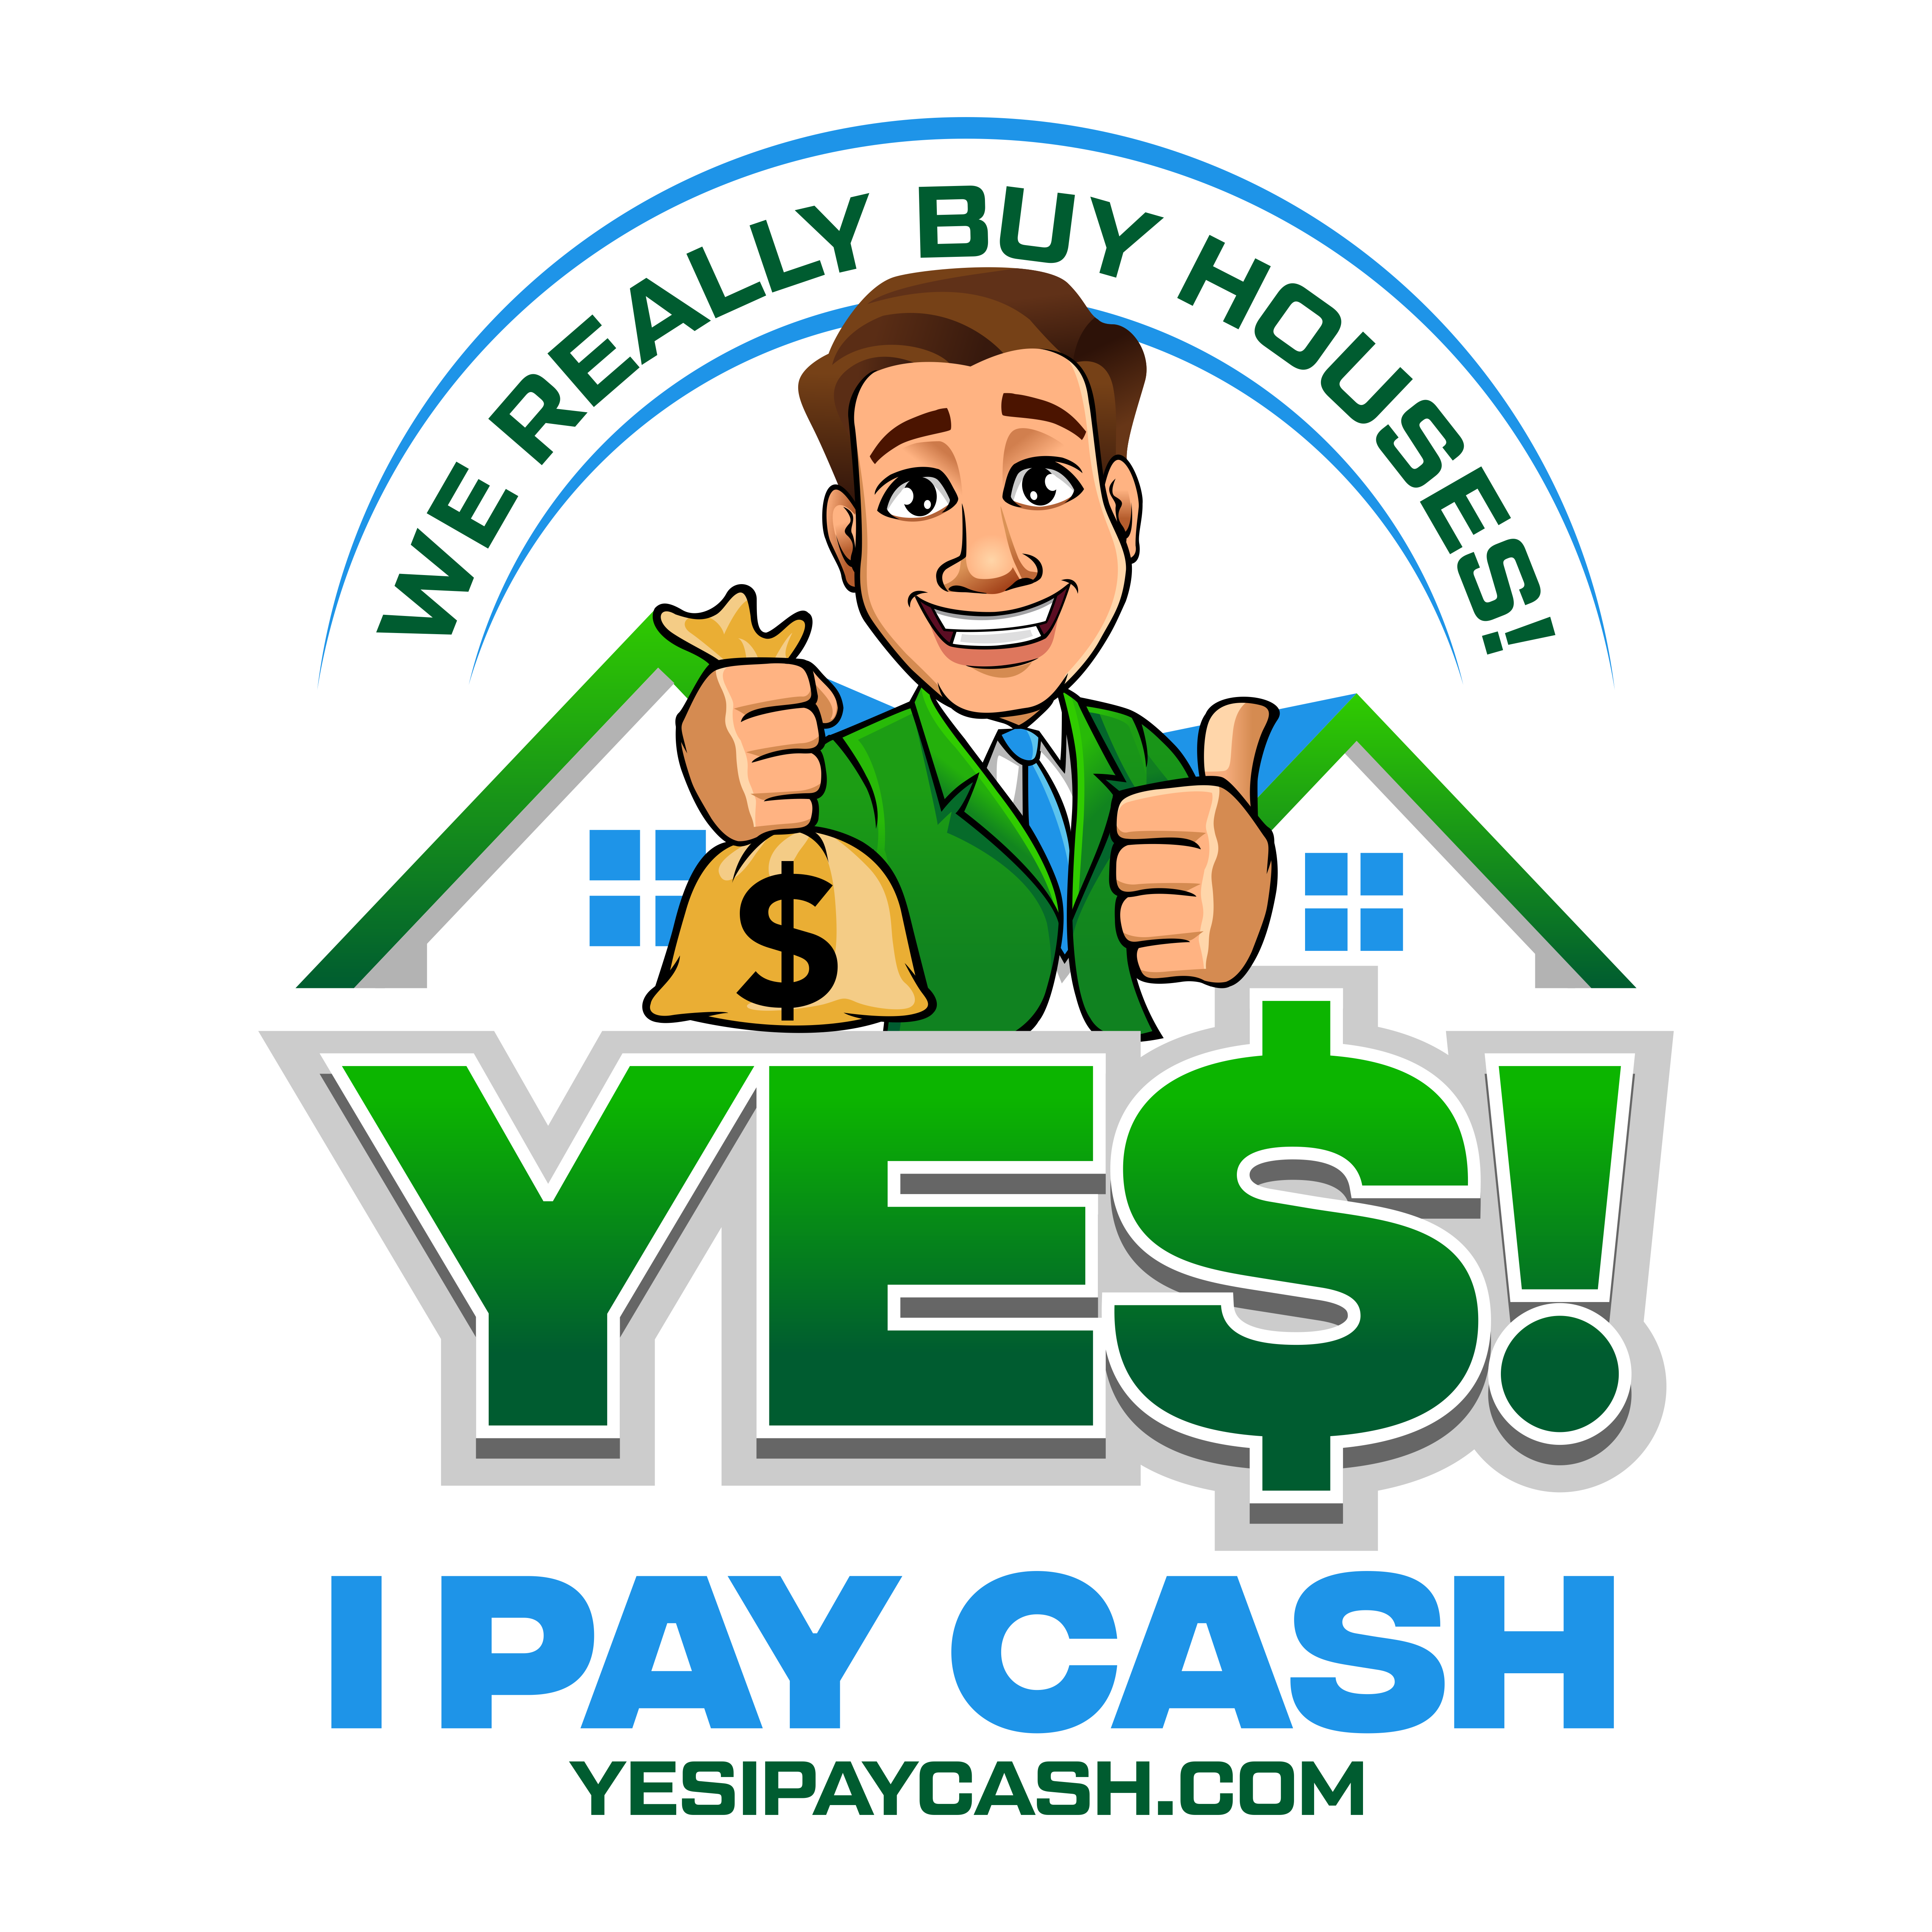 Yes I Pay Cash - We Buy Houses Closes Cash Home Sales Across Maryland in 14 Days